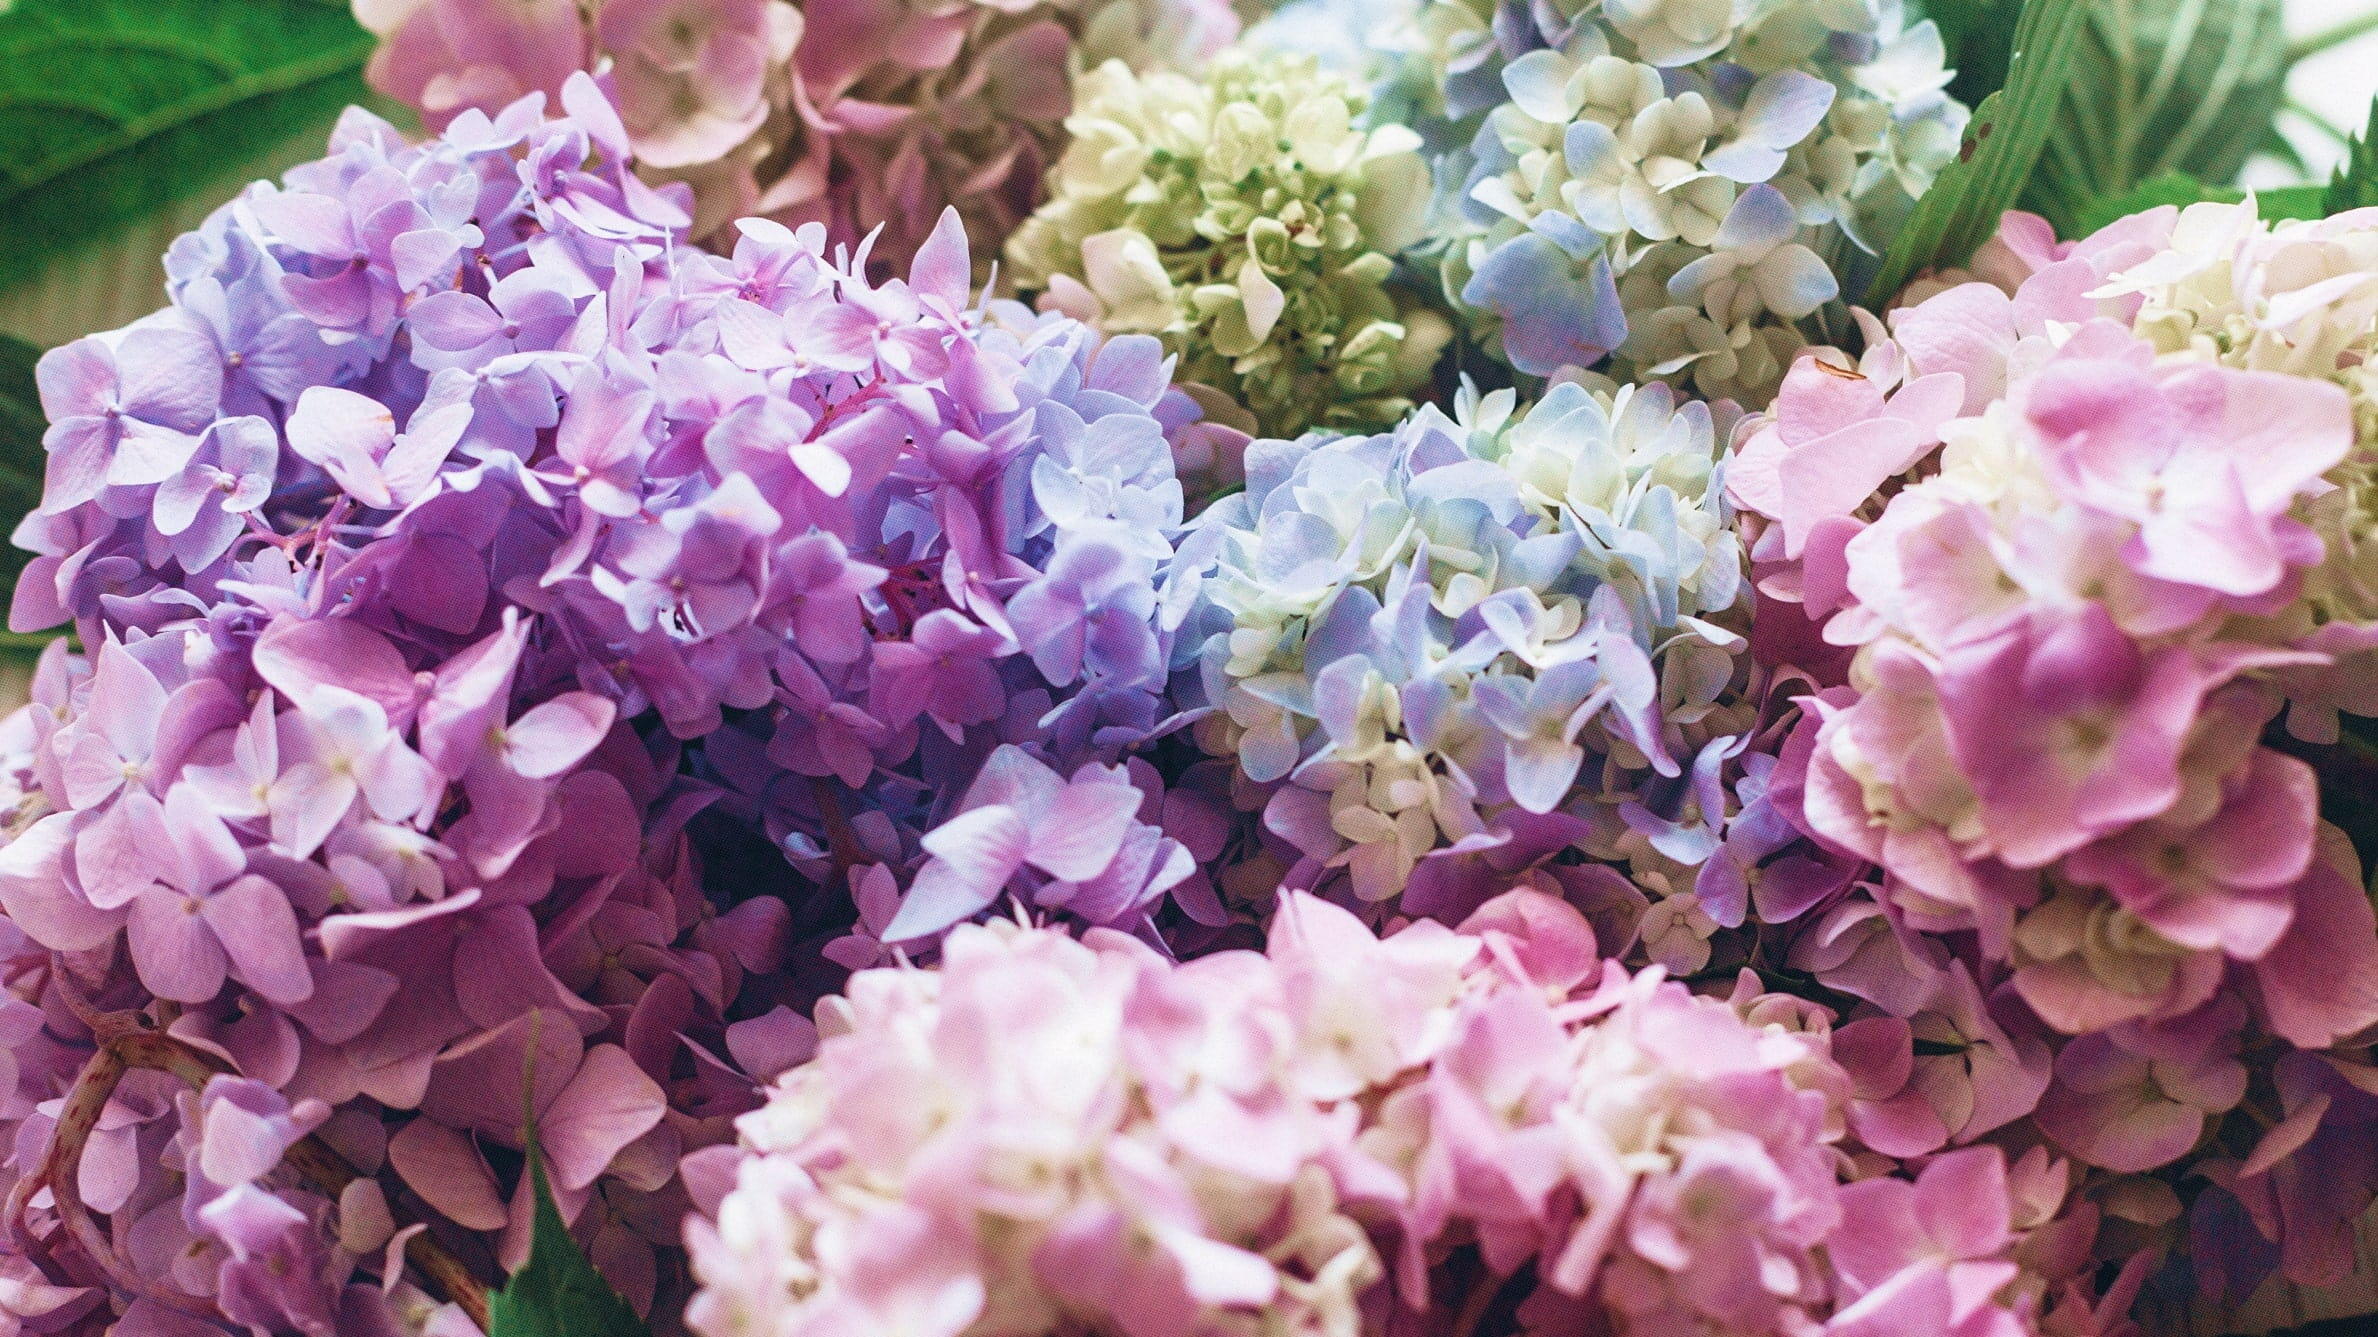 Hydrangeas for Mothers Day